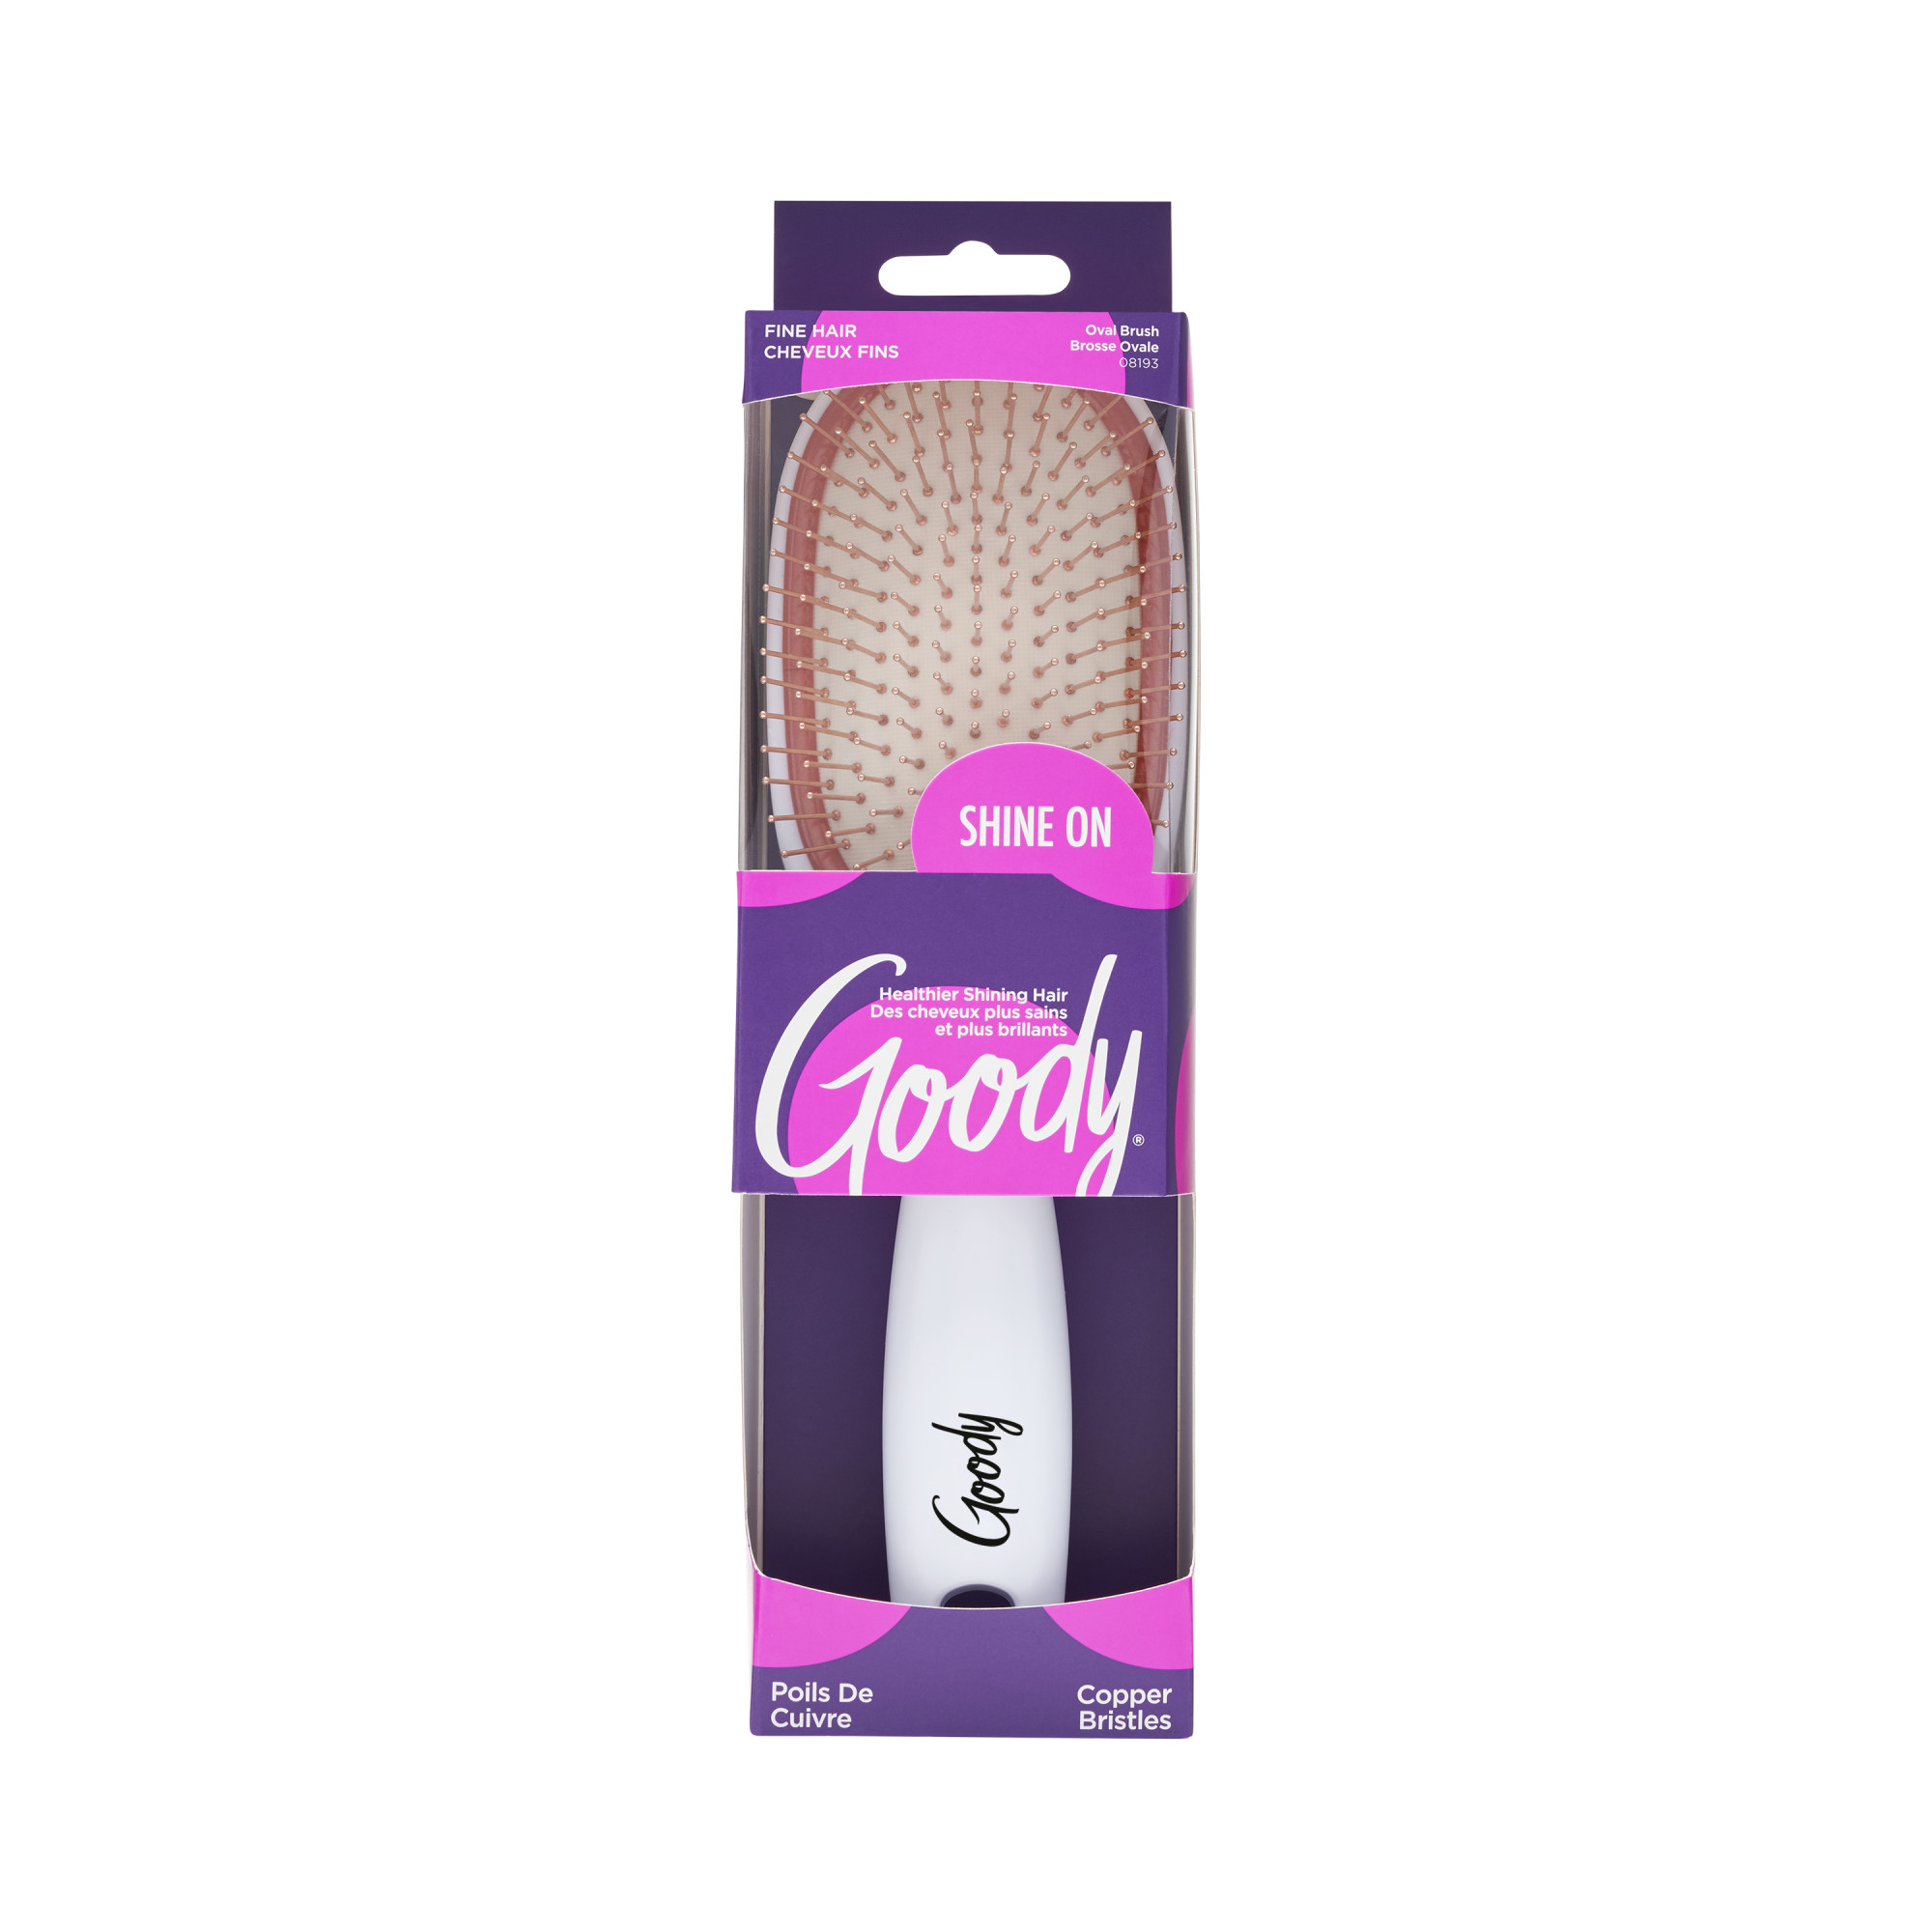 Goody® Shine On™ Clean Radiance Oval Brush with Copper Bristles - image 1 of 2